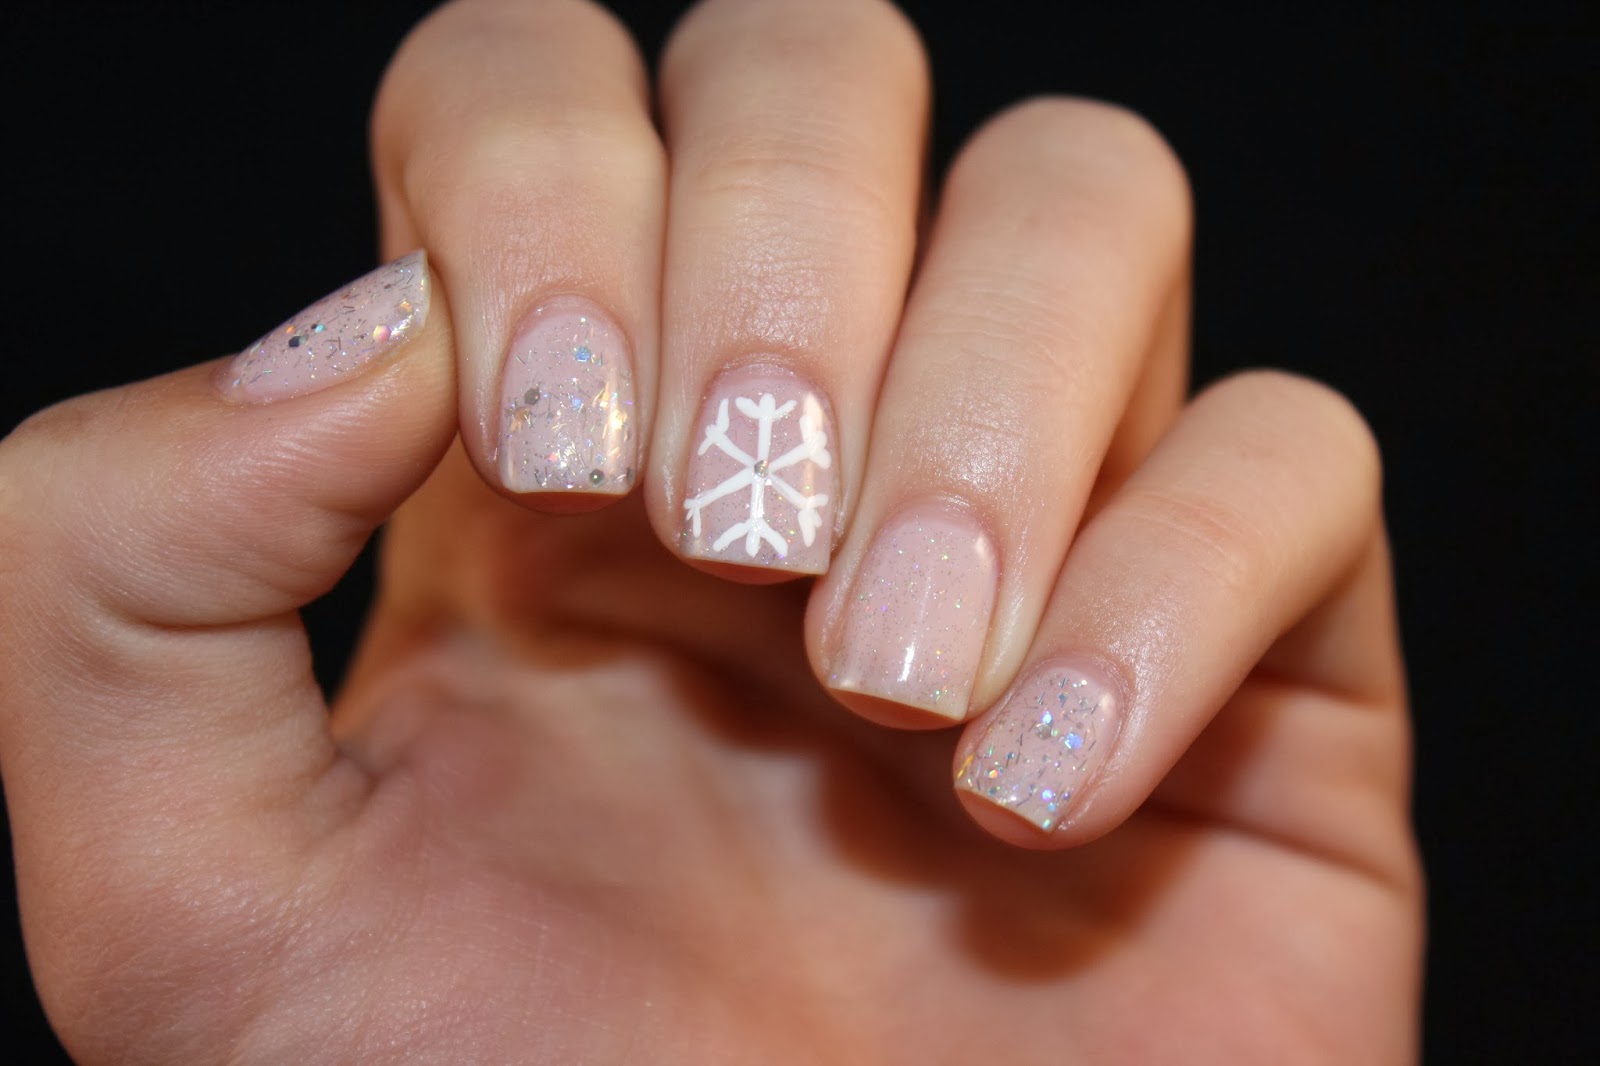 4. "Classy Holiday Nails" - wide 9